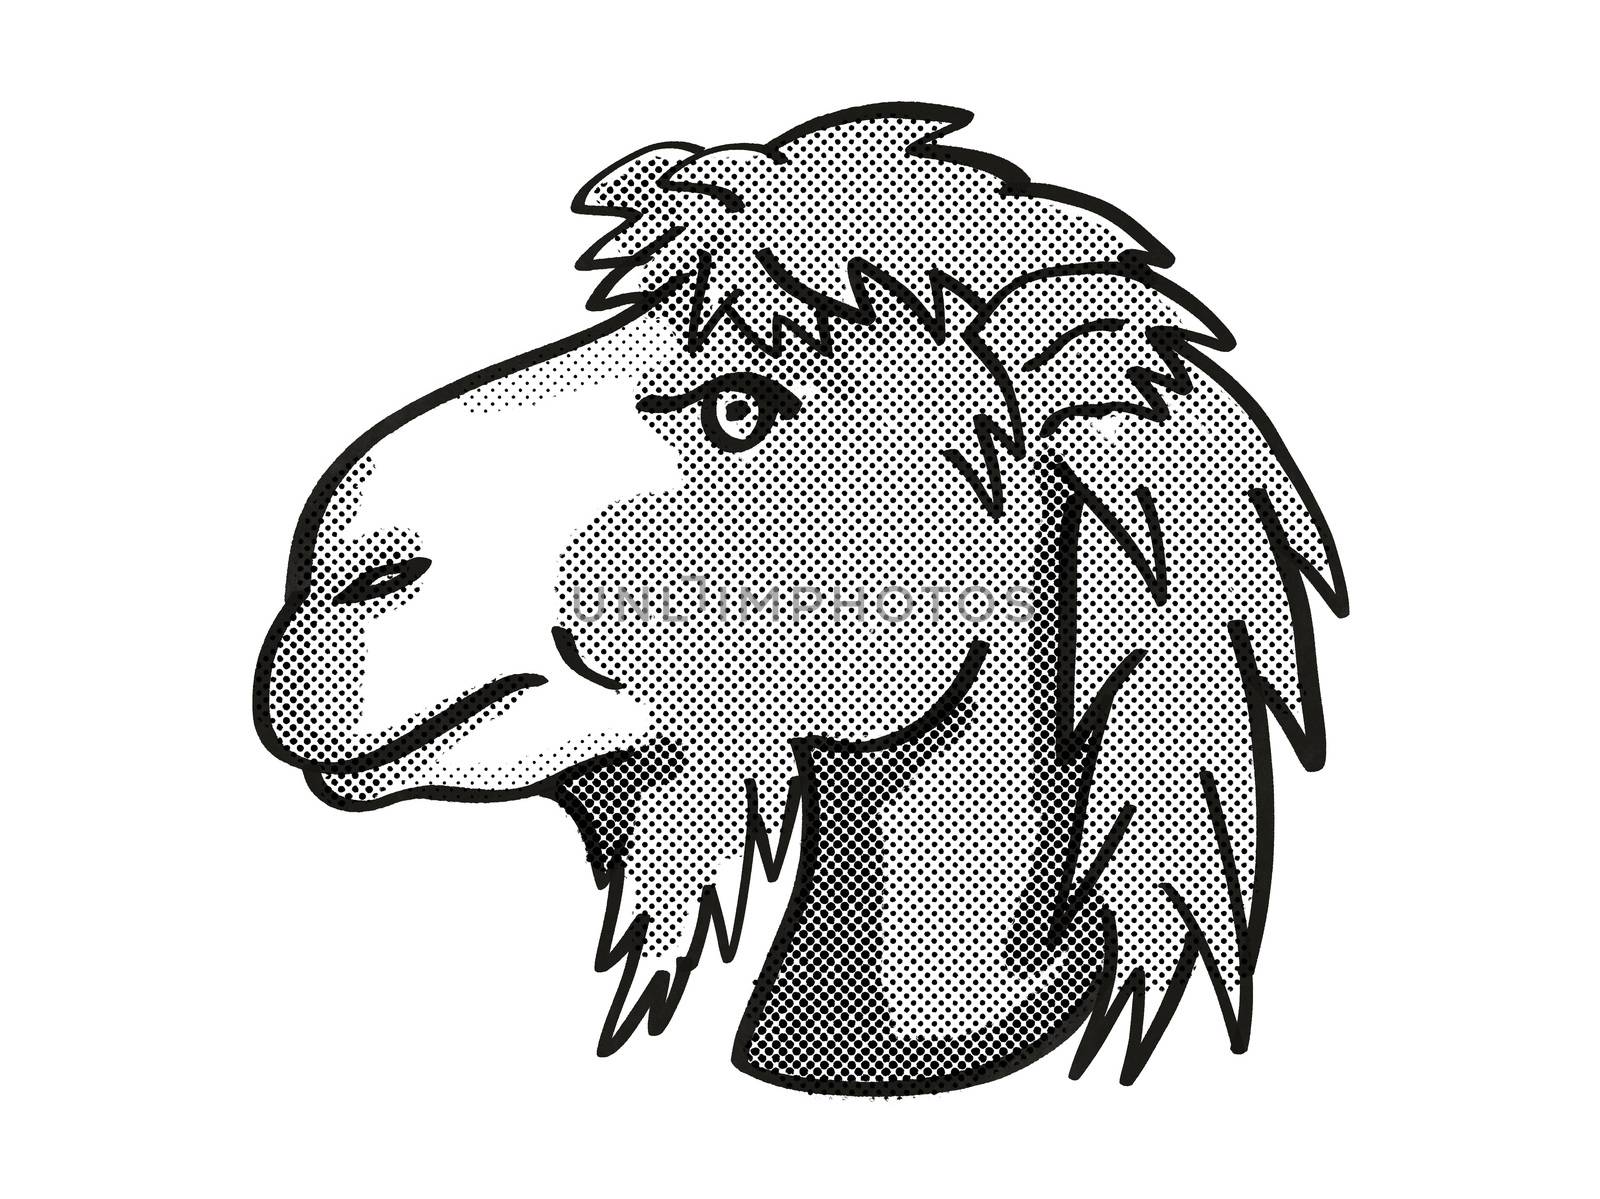 Retro cartoon mono line style drawing of head of a Bactrian Camel or Camelus Bactrianus, an endangered wildlife species on isolated white background done in black and white.